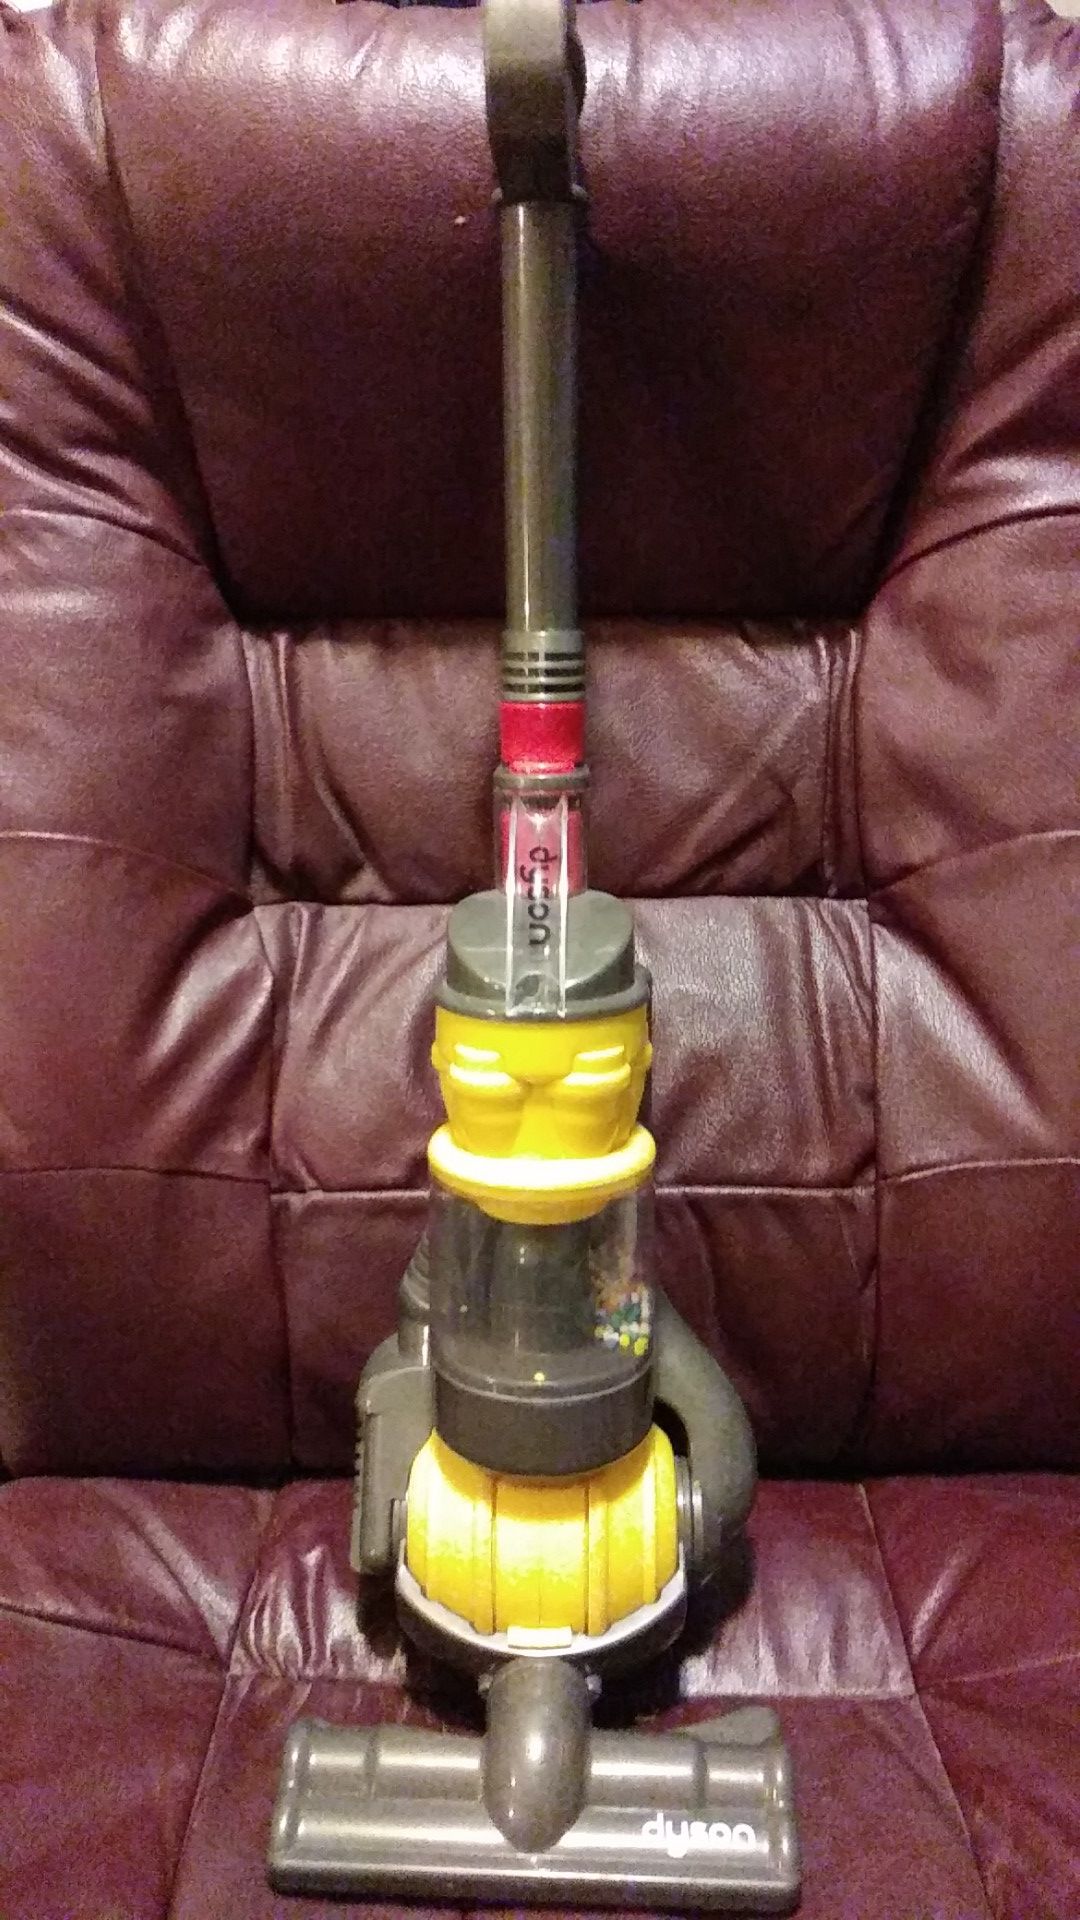 Dyson Vac toy for child